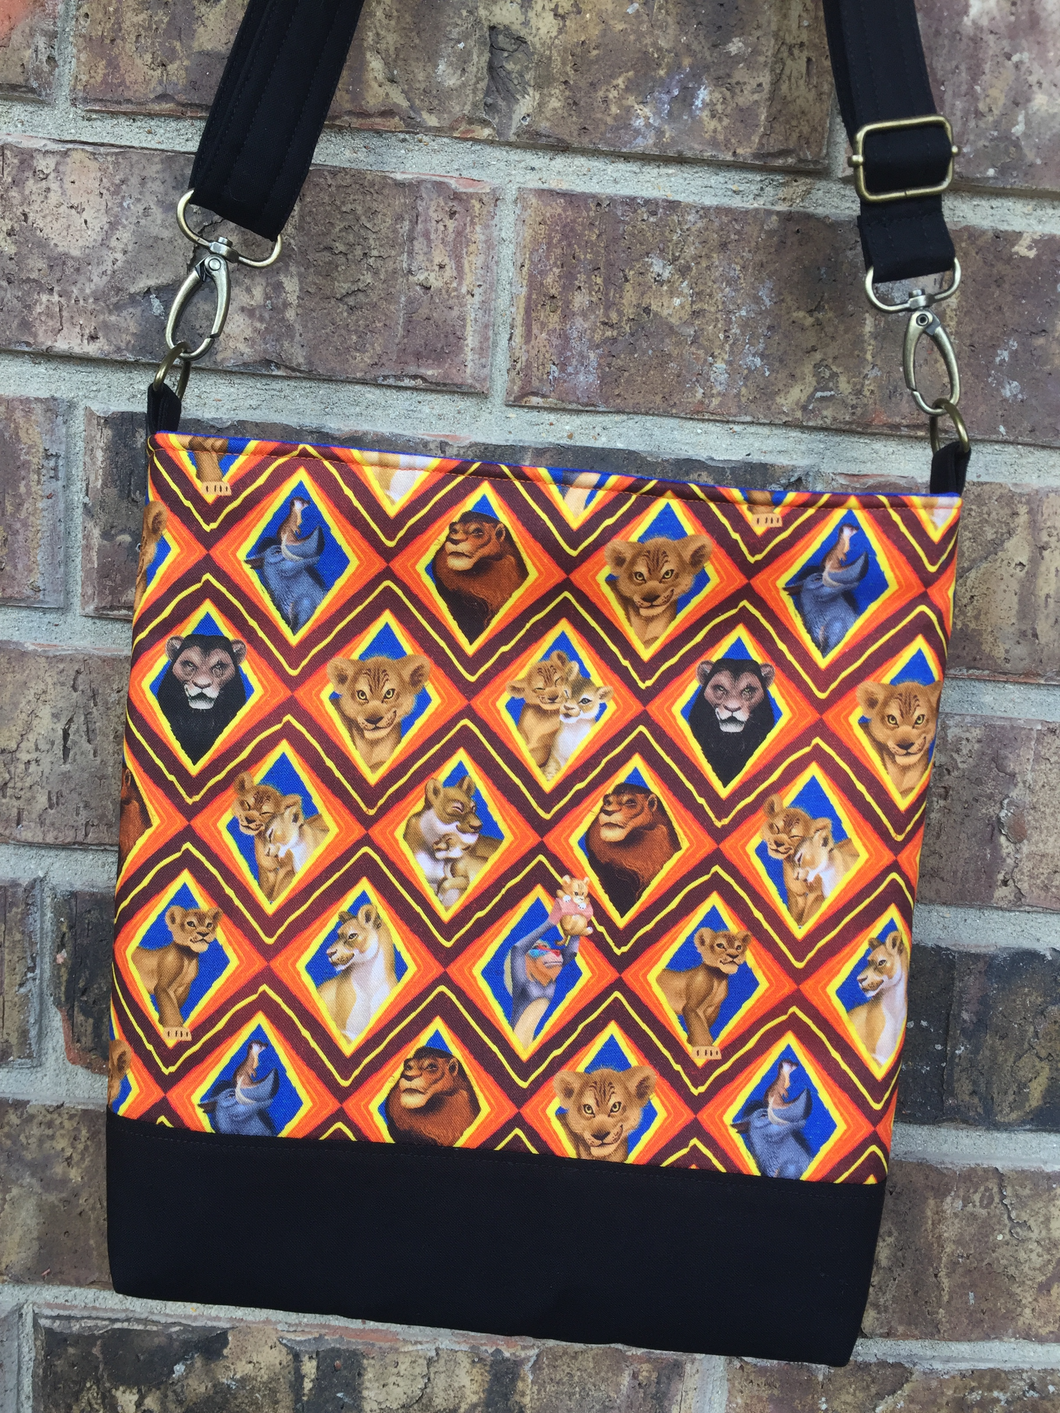 Messenger Bag Made With Licensed Lion Family Fabric - Adjustable Strap - Zippered Closure - Zippered Pocket - Cross Body Bag